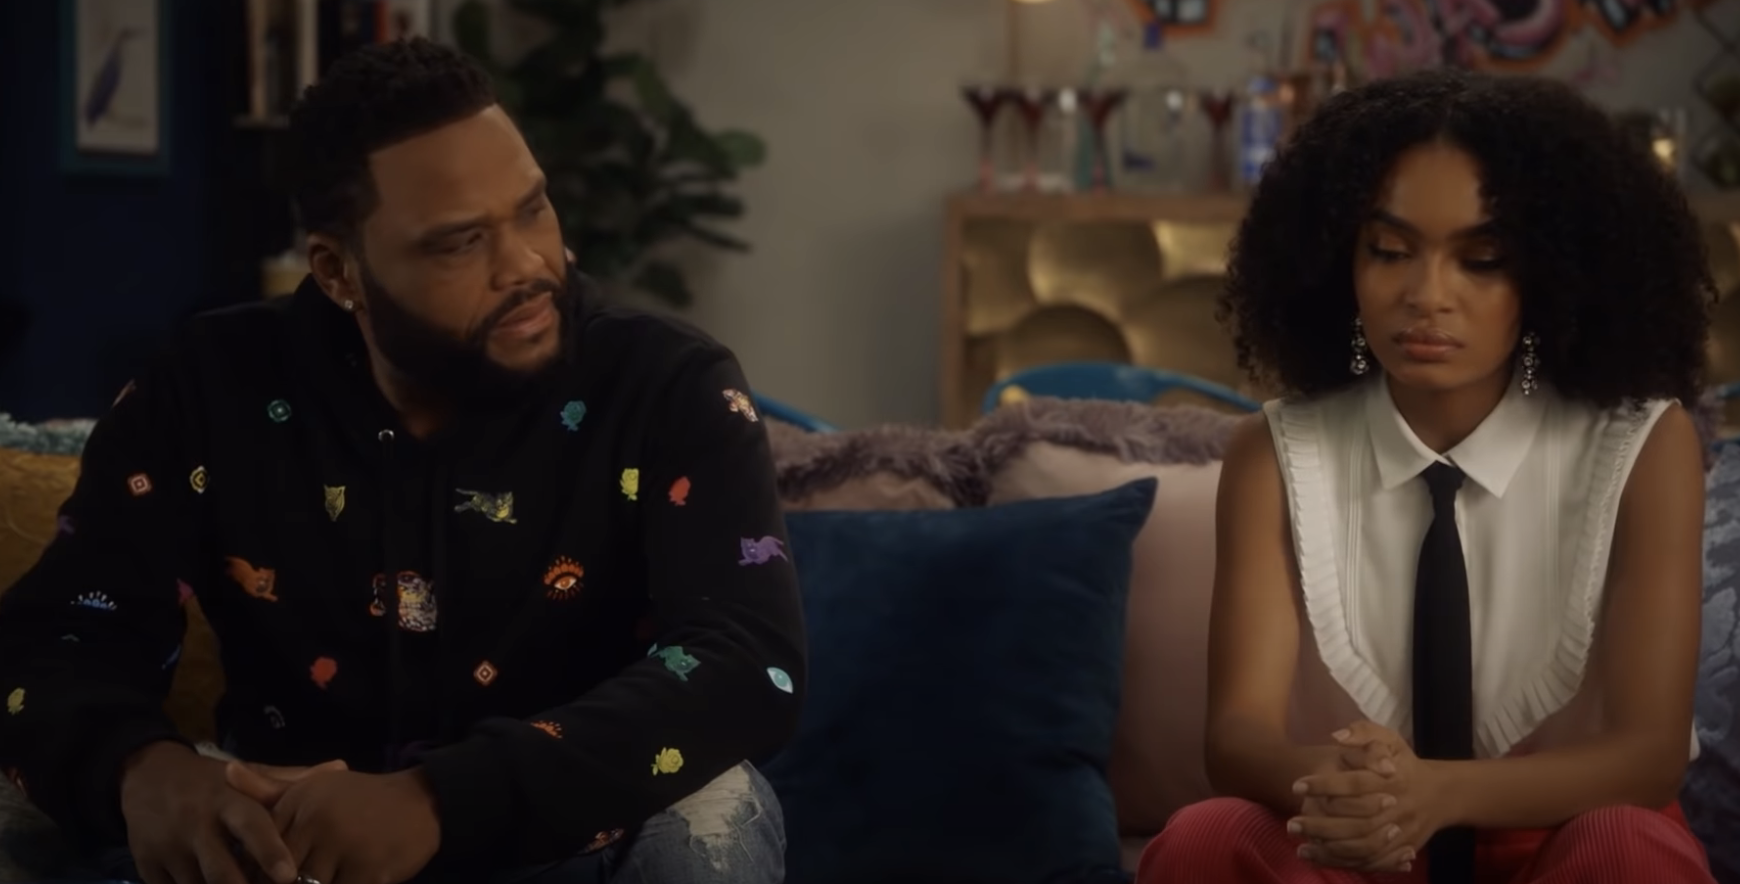 Dre from Black-ish sitting on a couch and looking at Zoey